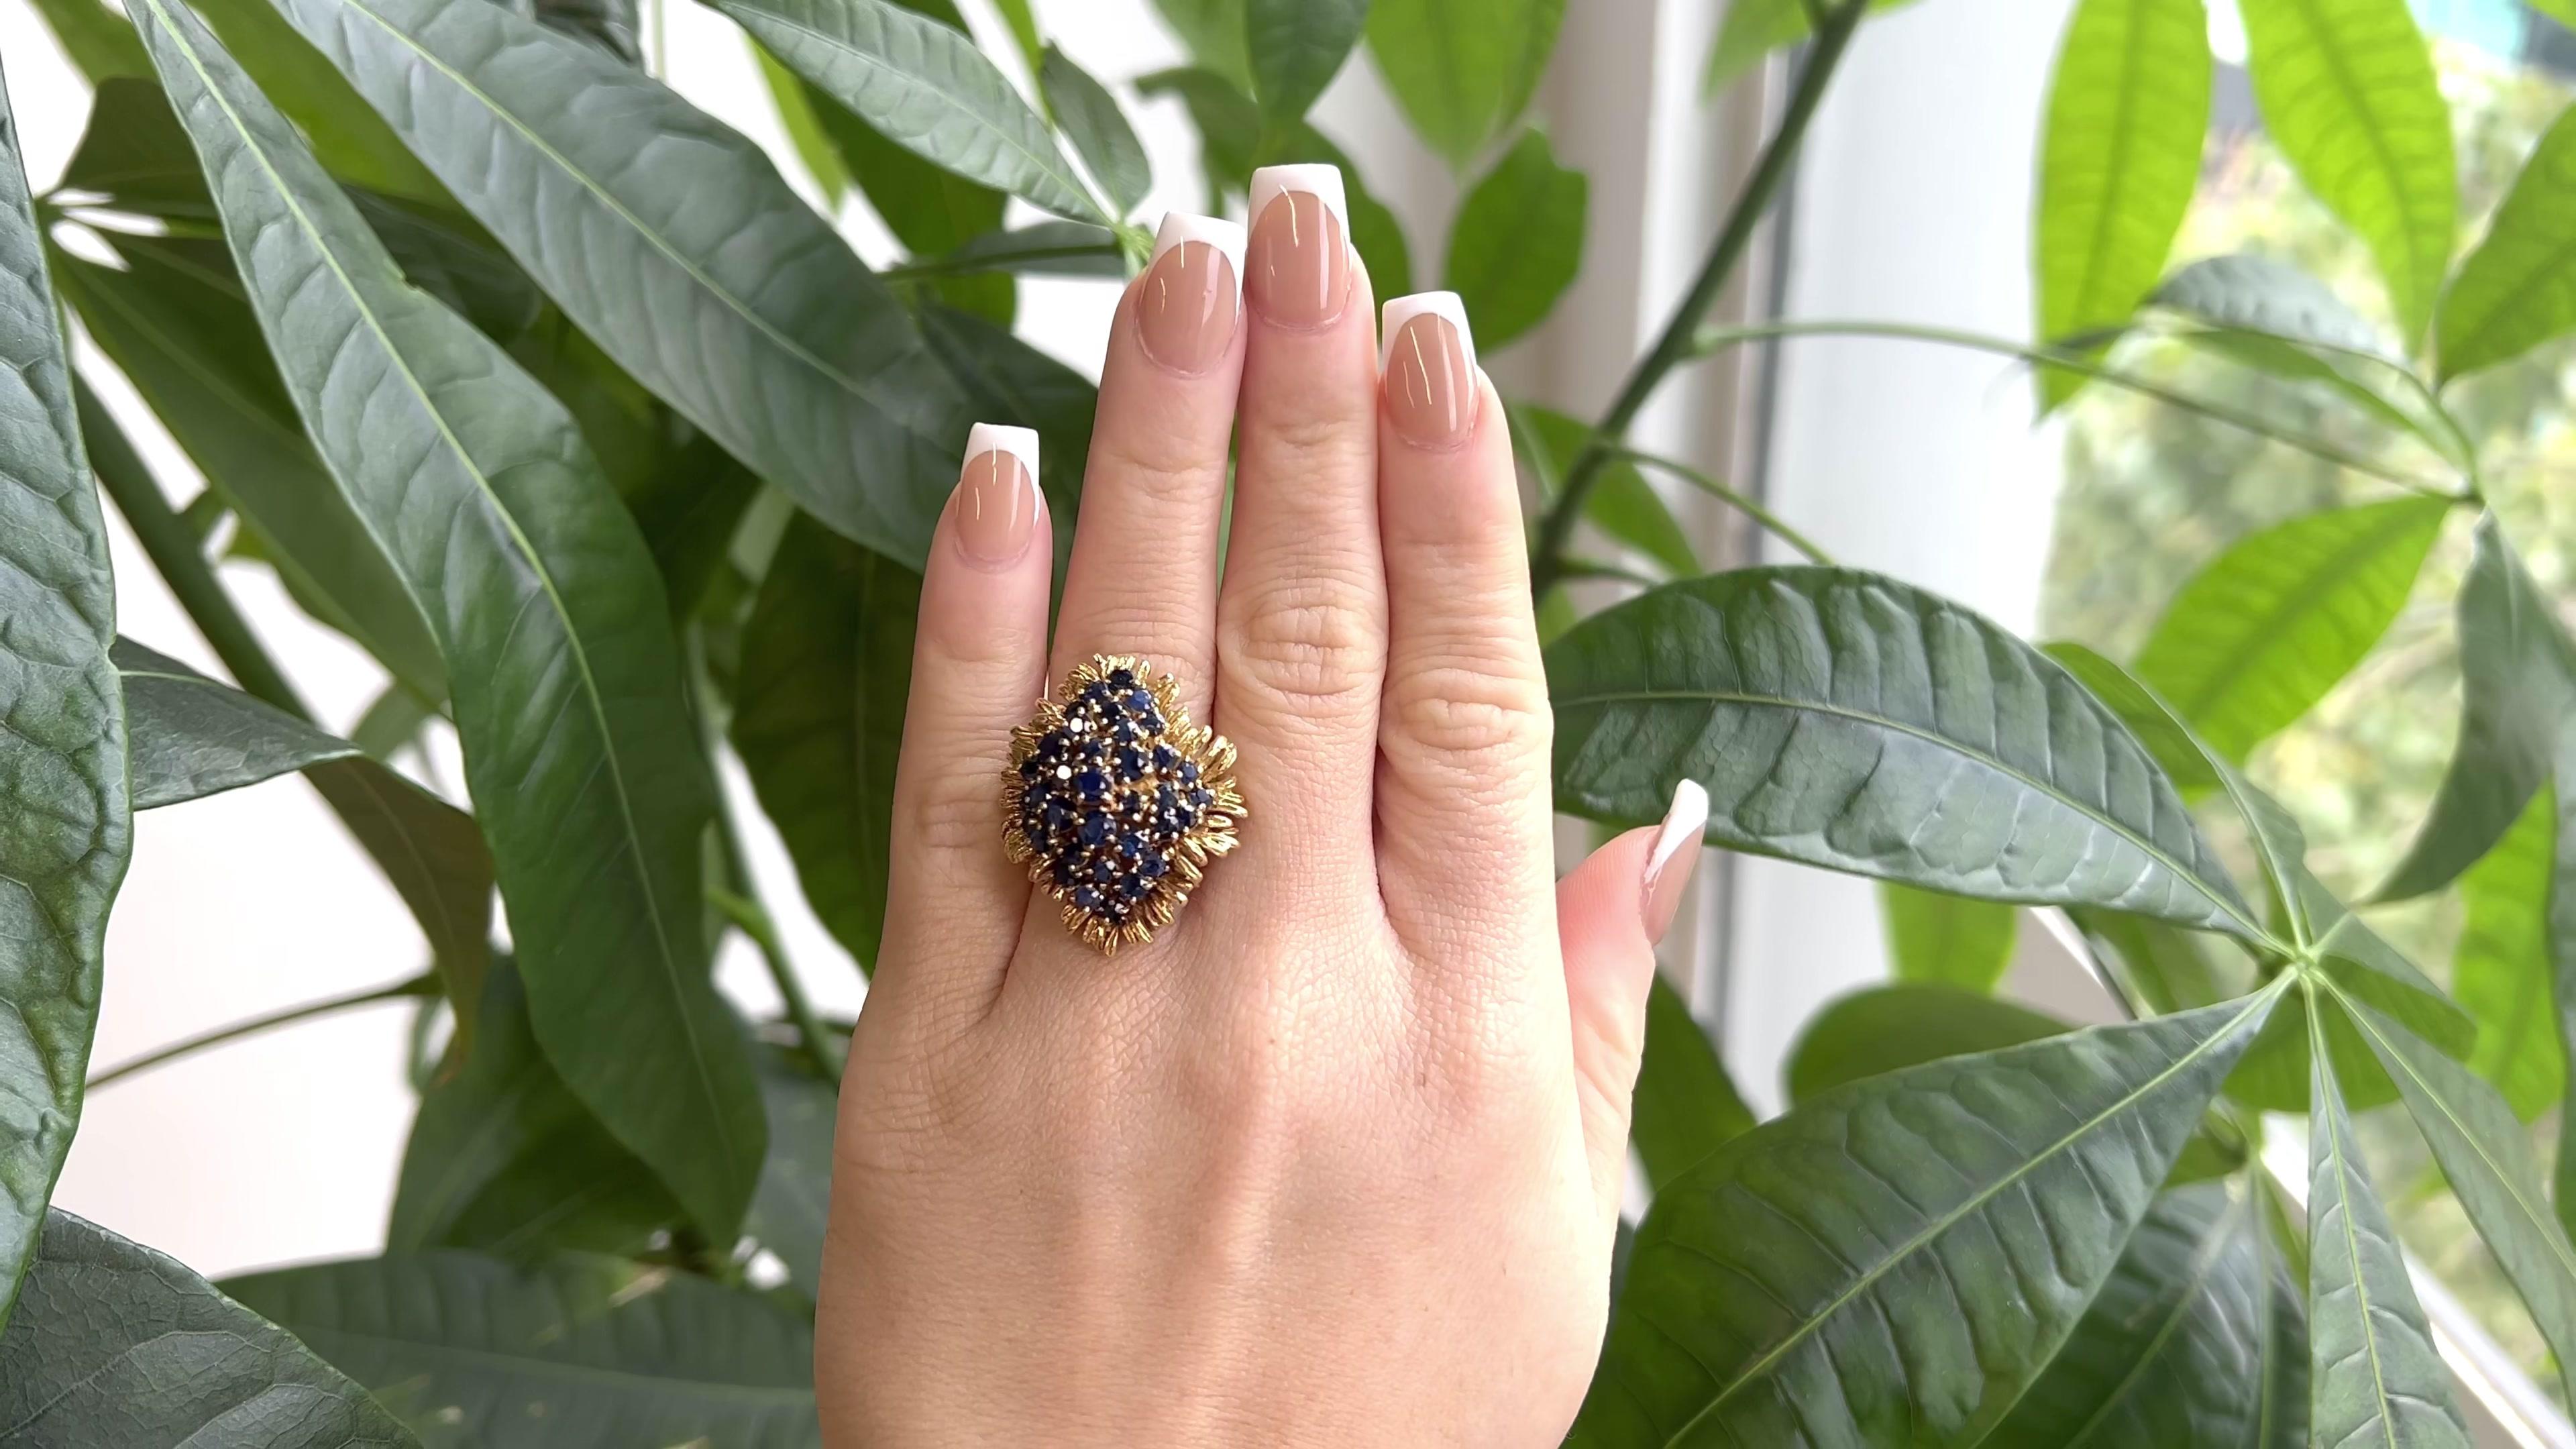 One Vintage Sapphire 18 Karat Gold Cluster Statement Ring. featuring 35 round sapphires with a total weight of approximately 4.50 carats. Crafted in 18 karat yellow gold with purity marks. Circa 1970s. The ring is a size 7 and may be resized.